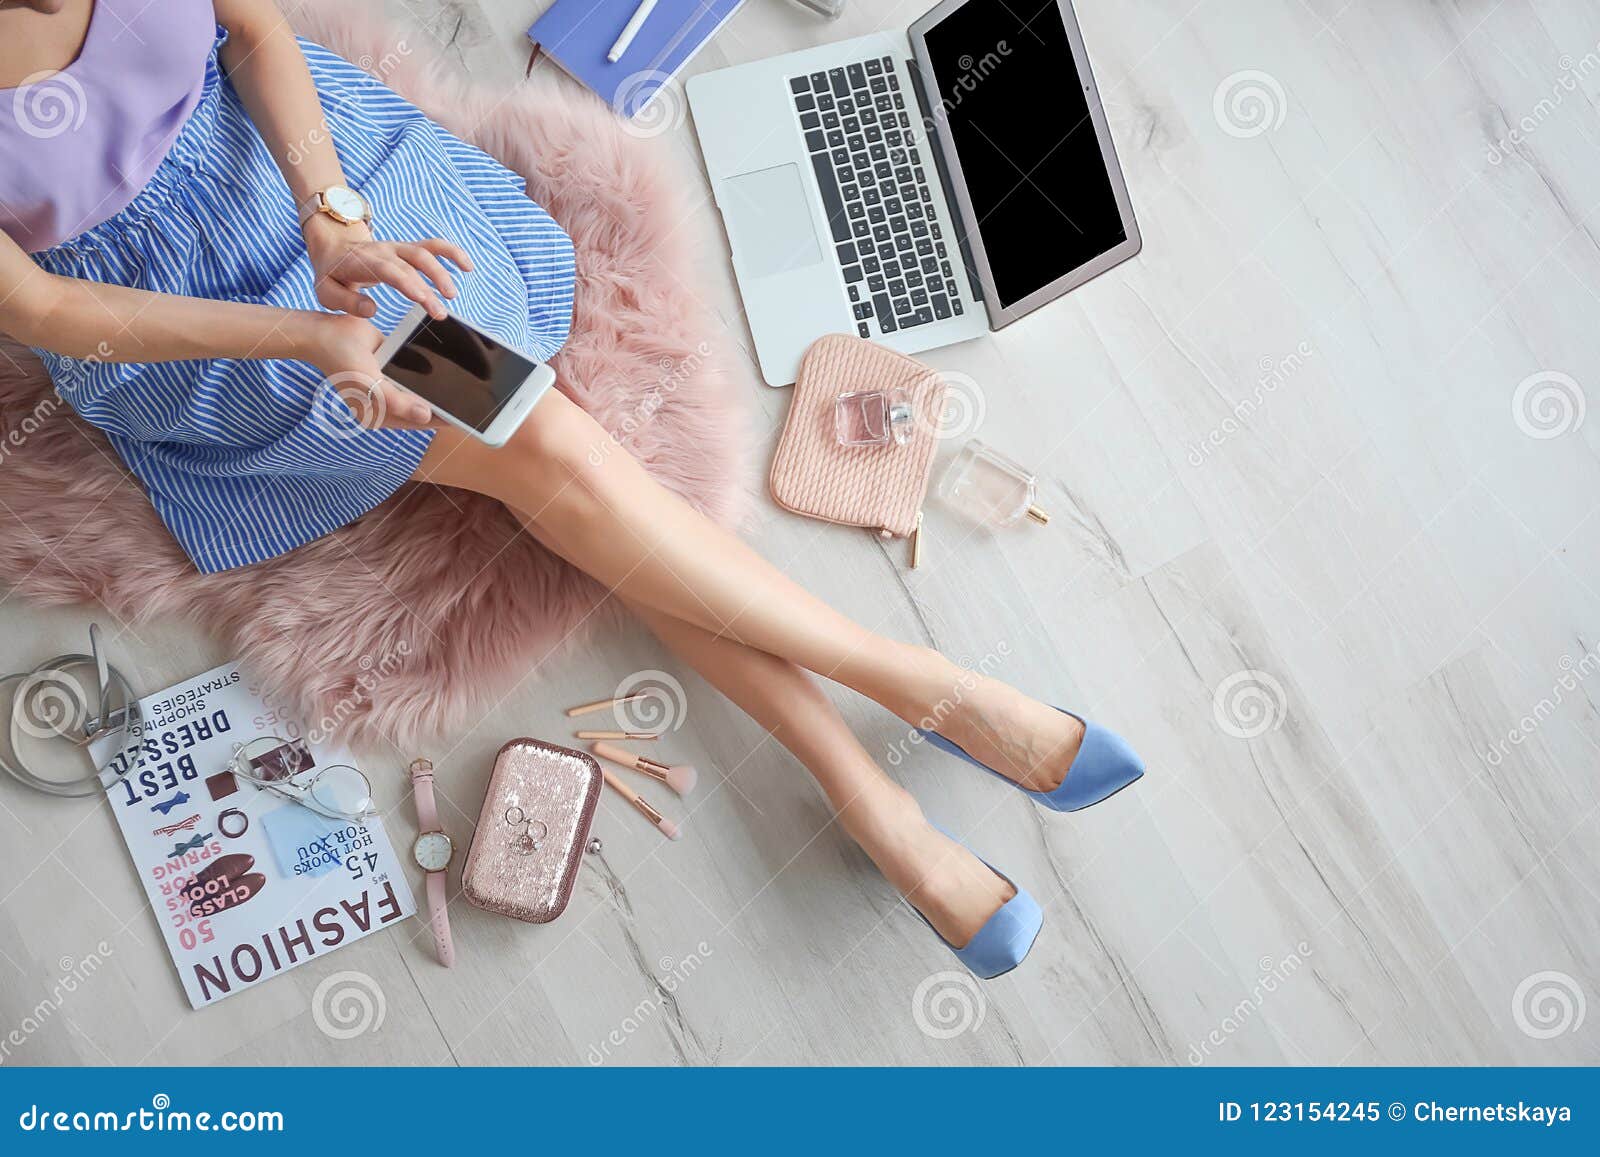 female beauty blogger with smartphone indoors